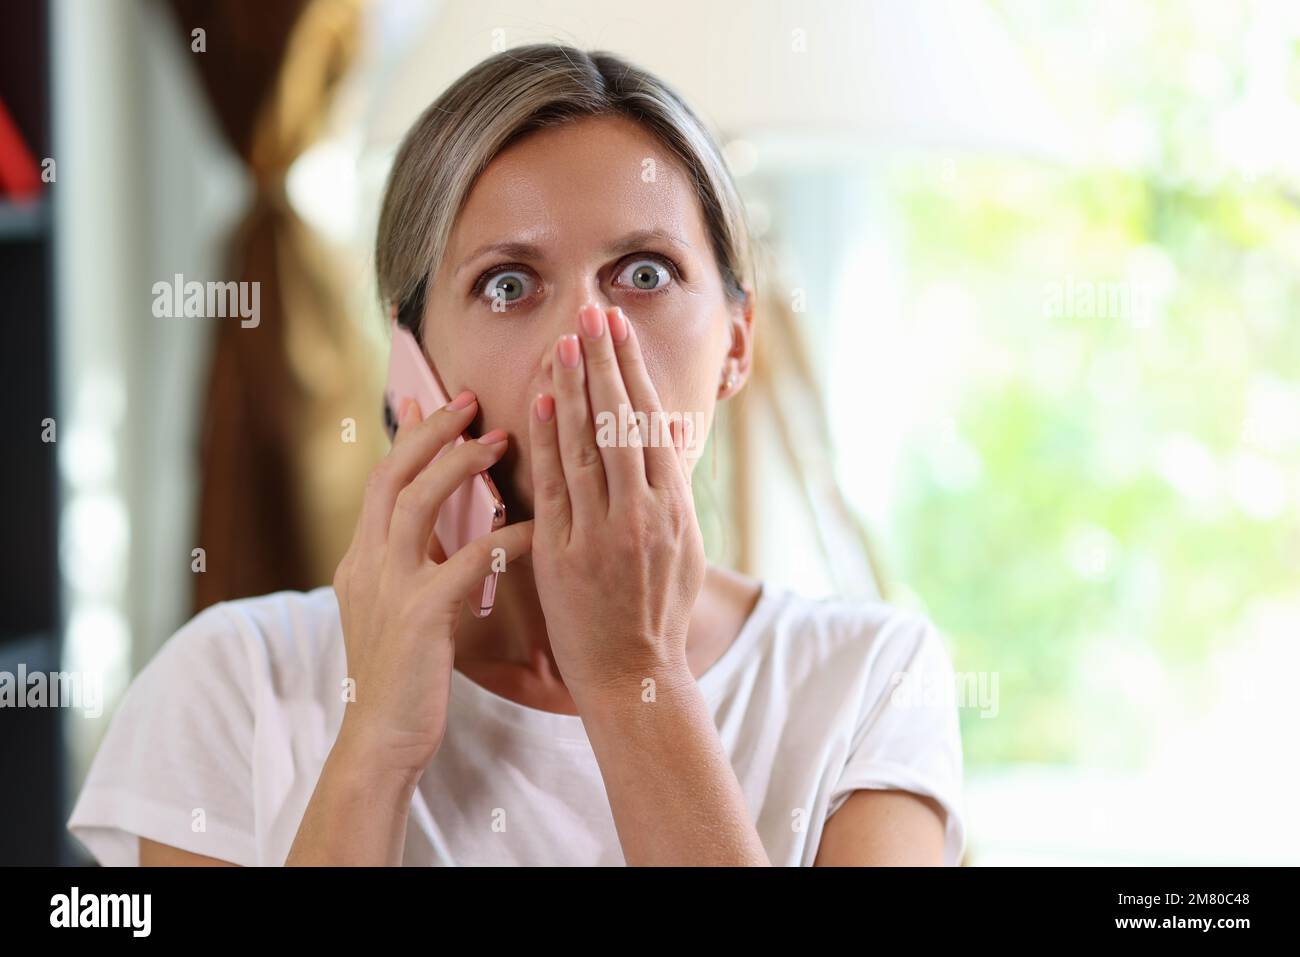 Stressed and shocked woman talking on smartphone and looking at camera. Stock Photo